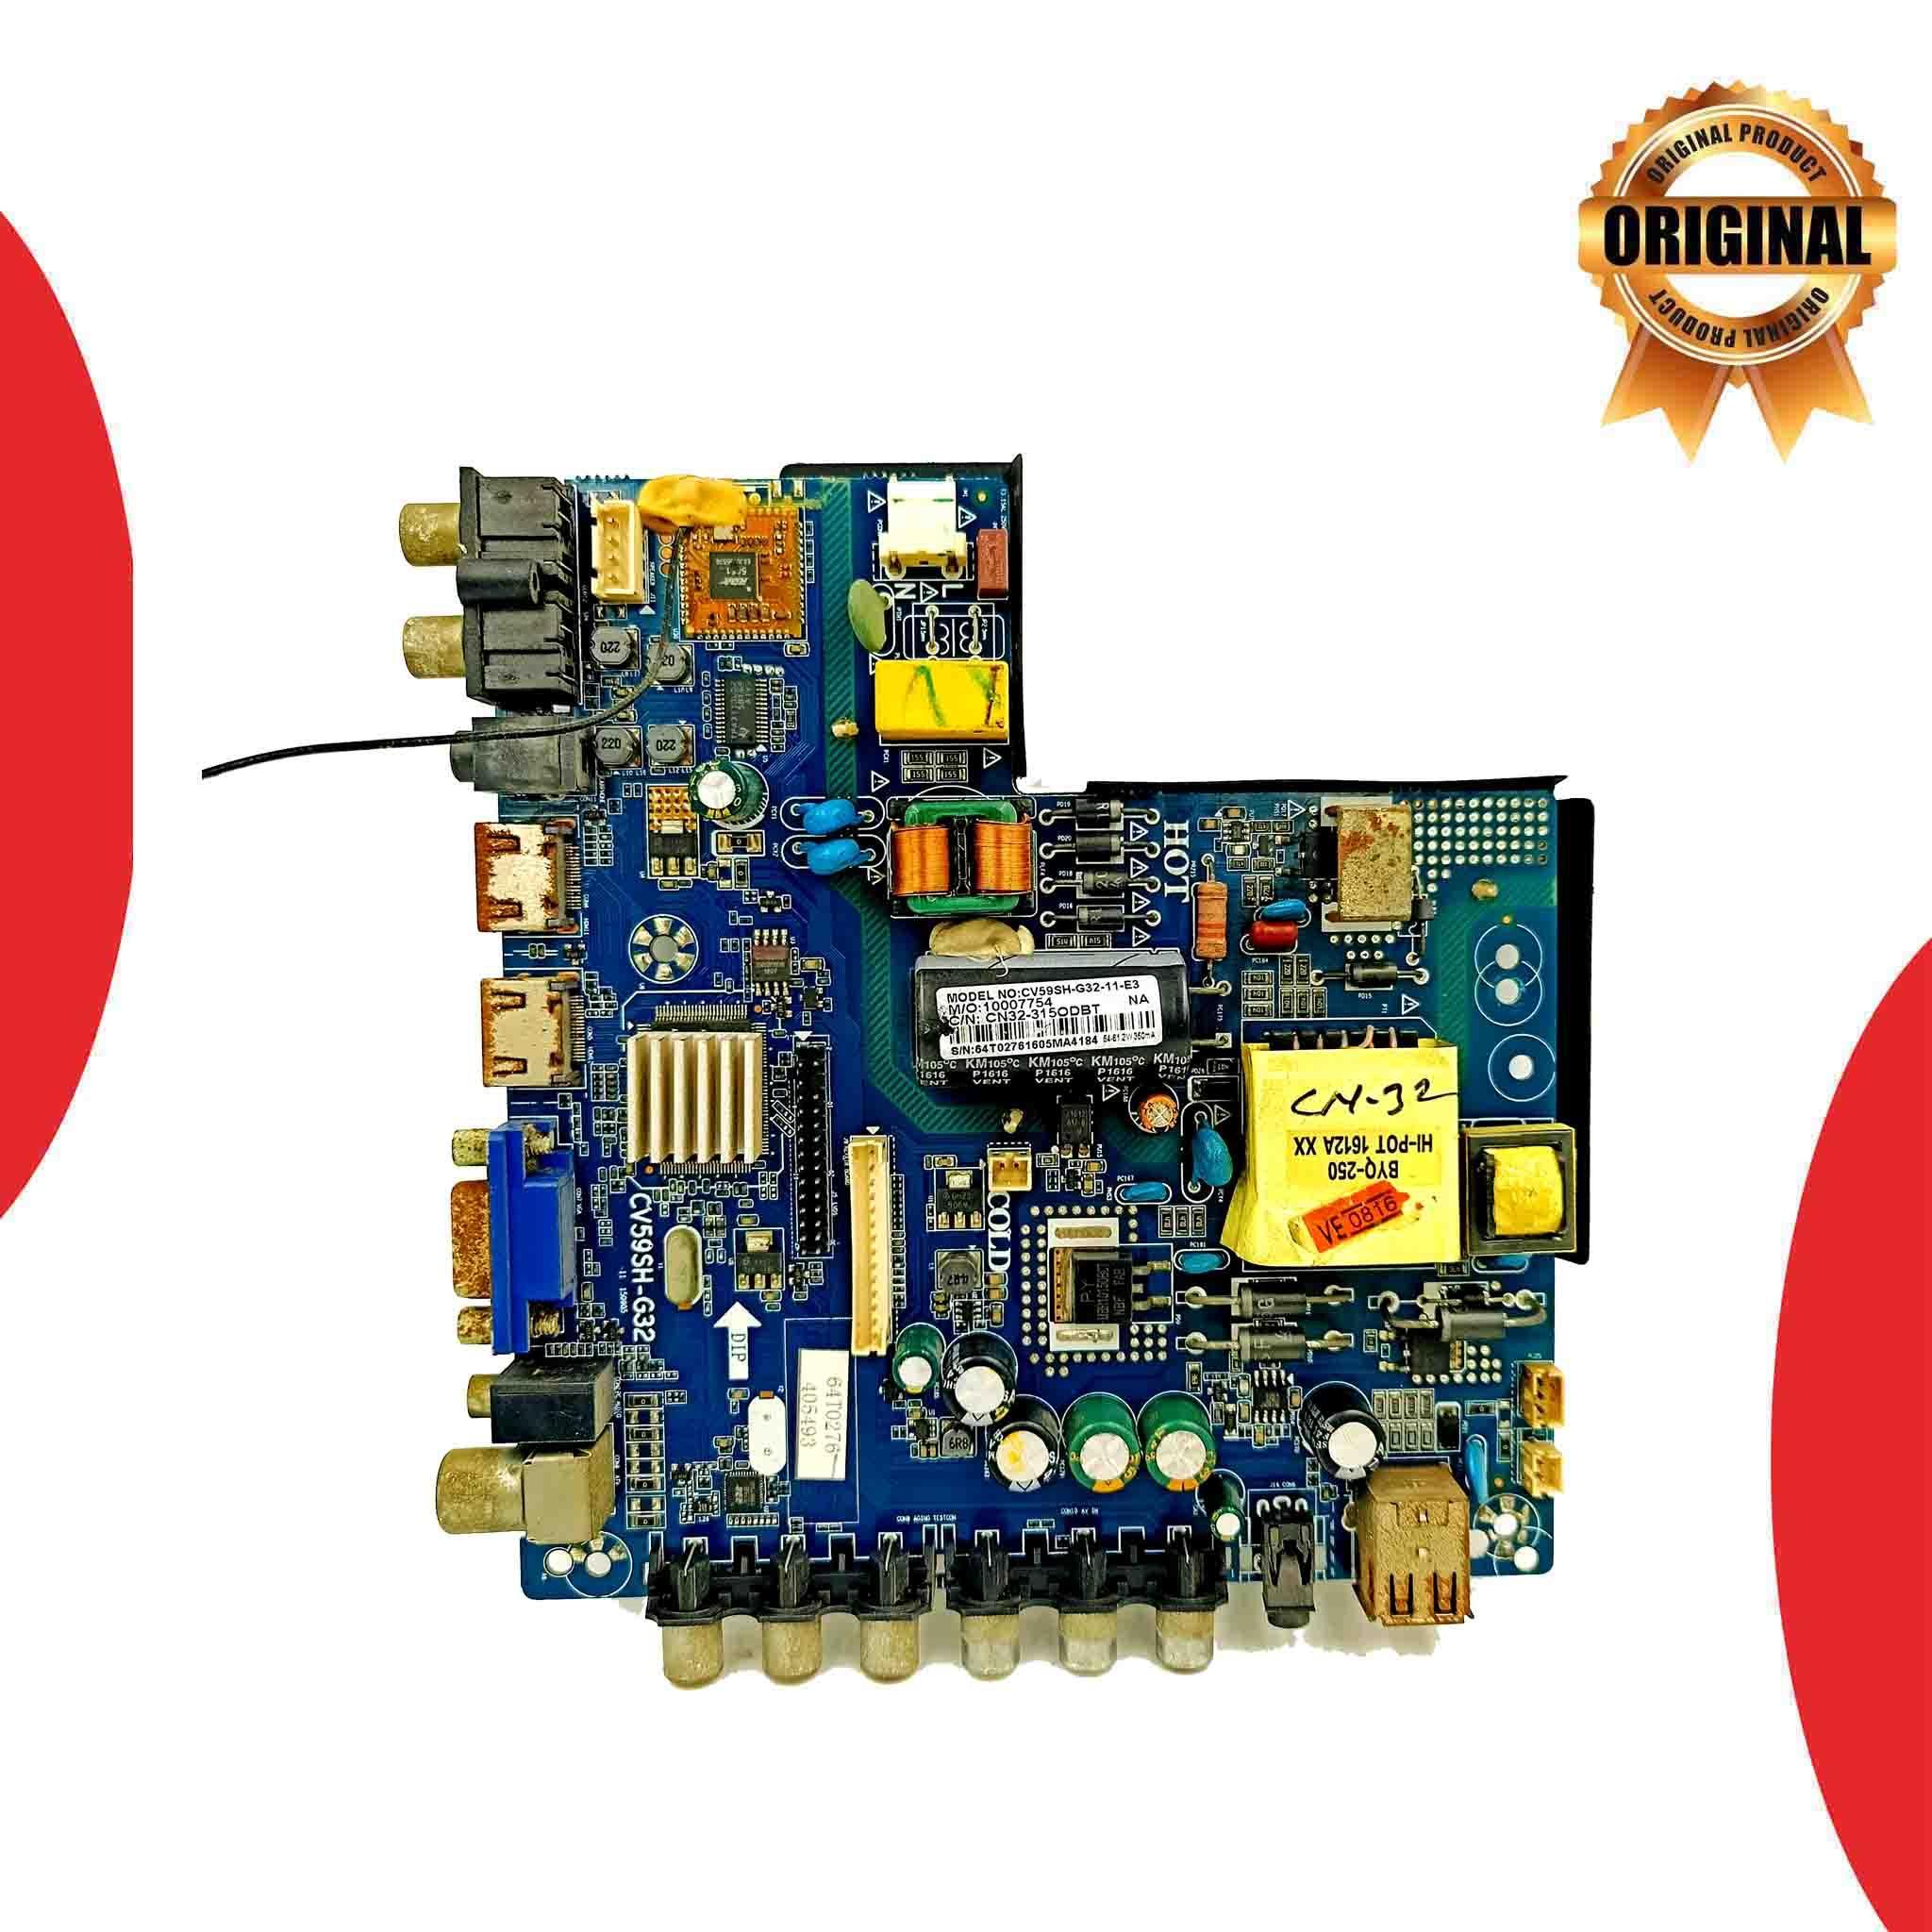 Croma 32 inch LED TV Motherboard for Model CREL7315 - Great Bharat Electronics